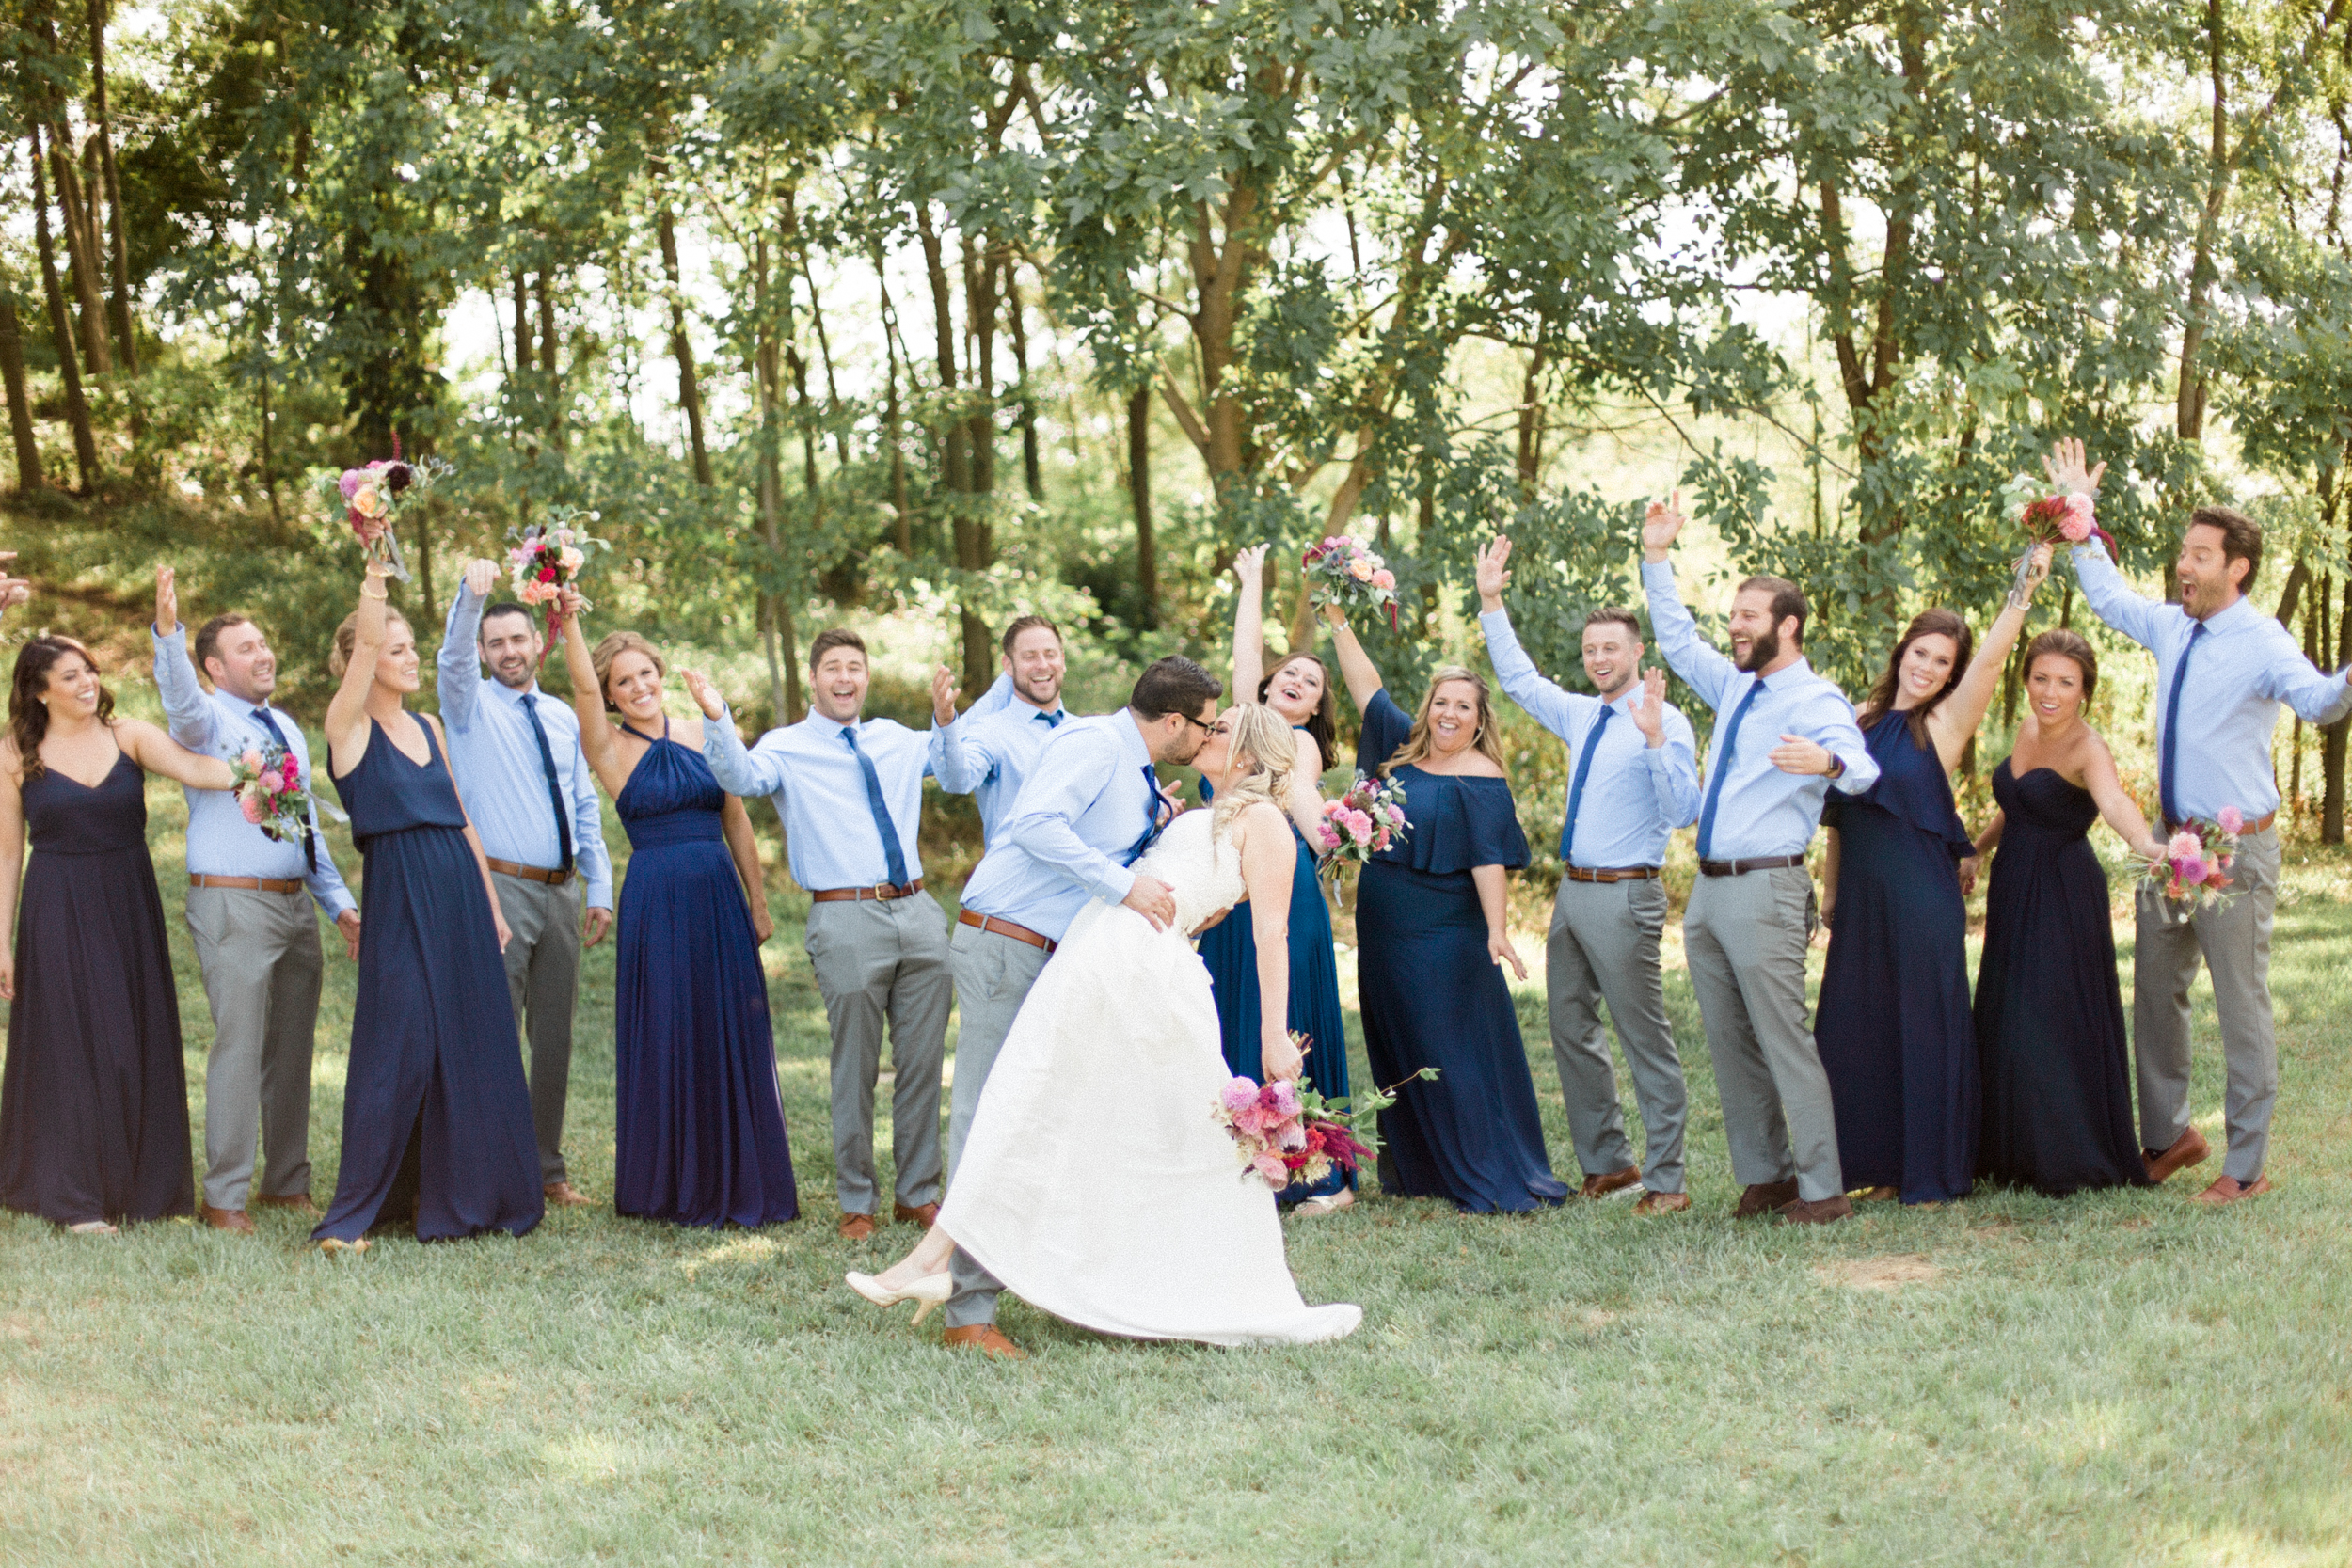 Bridal party photo, bridesmaids in navy. Photographed by Morgan Williams Photography